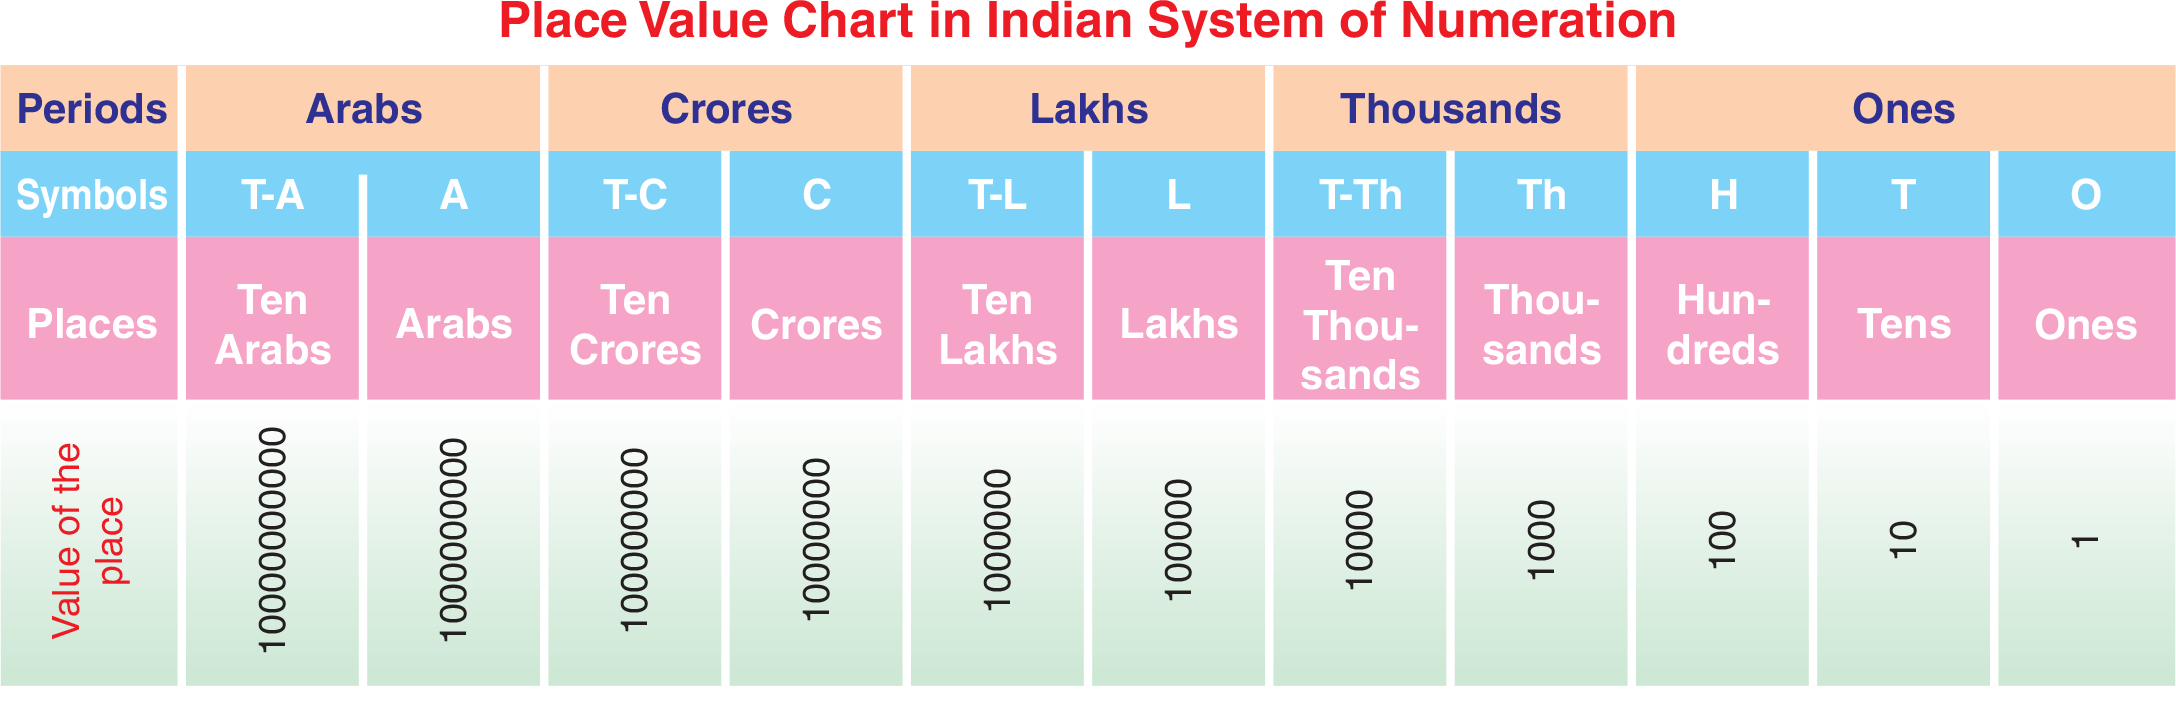 Indian System of Numeration